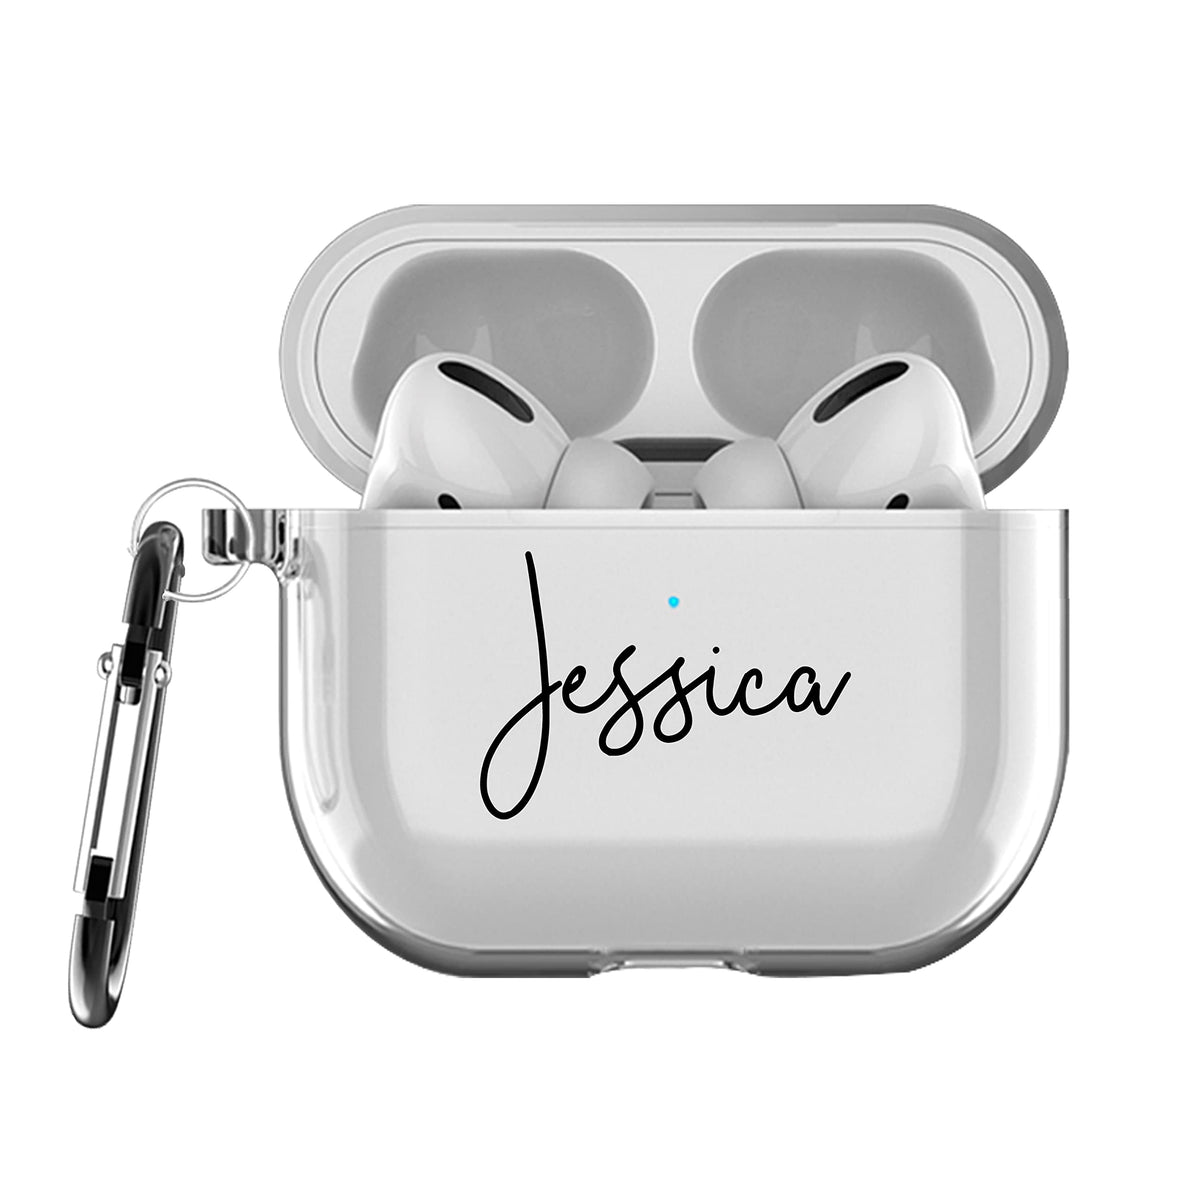 MARBLEFY Personalized AirPod 3 Case with Keychain Running Strap, Customized with Name on Clear AirPods 3rd Generation Case Cover Set, Great Cute Gift for women and girls